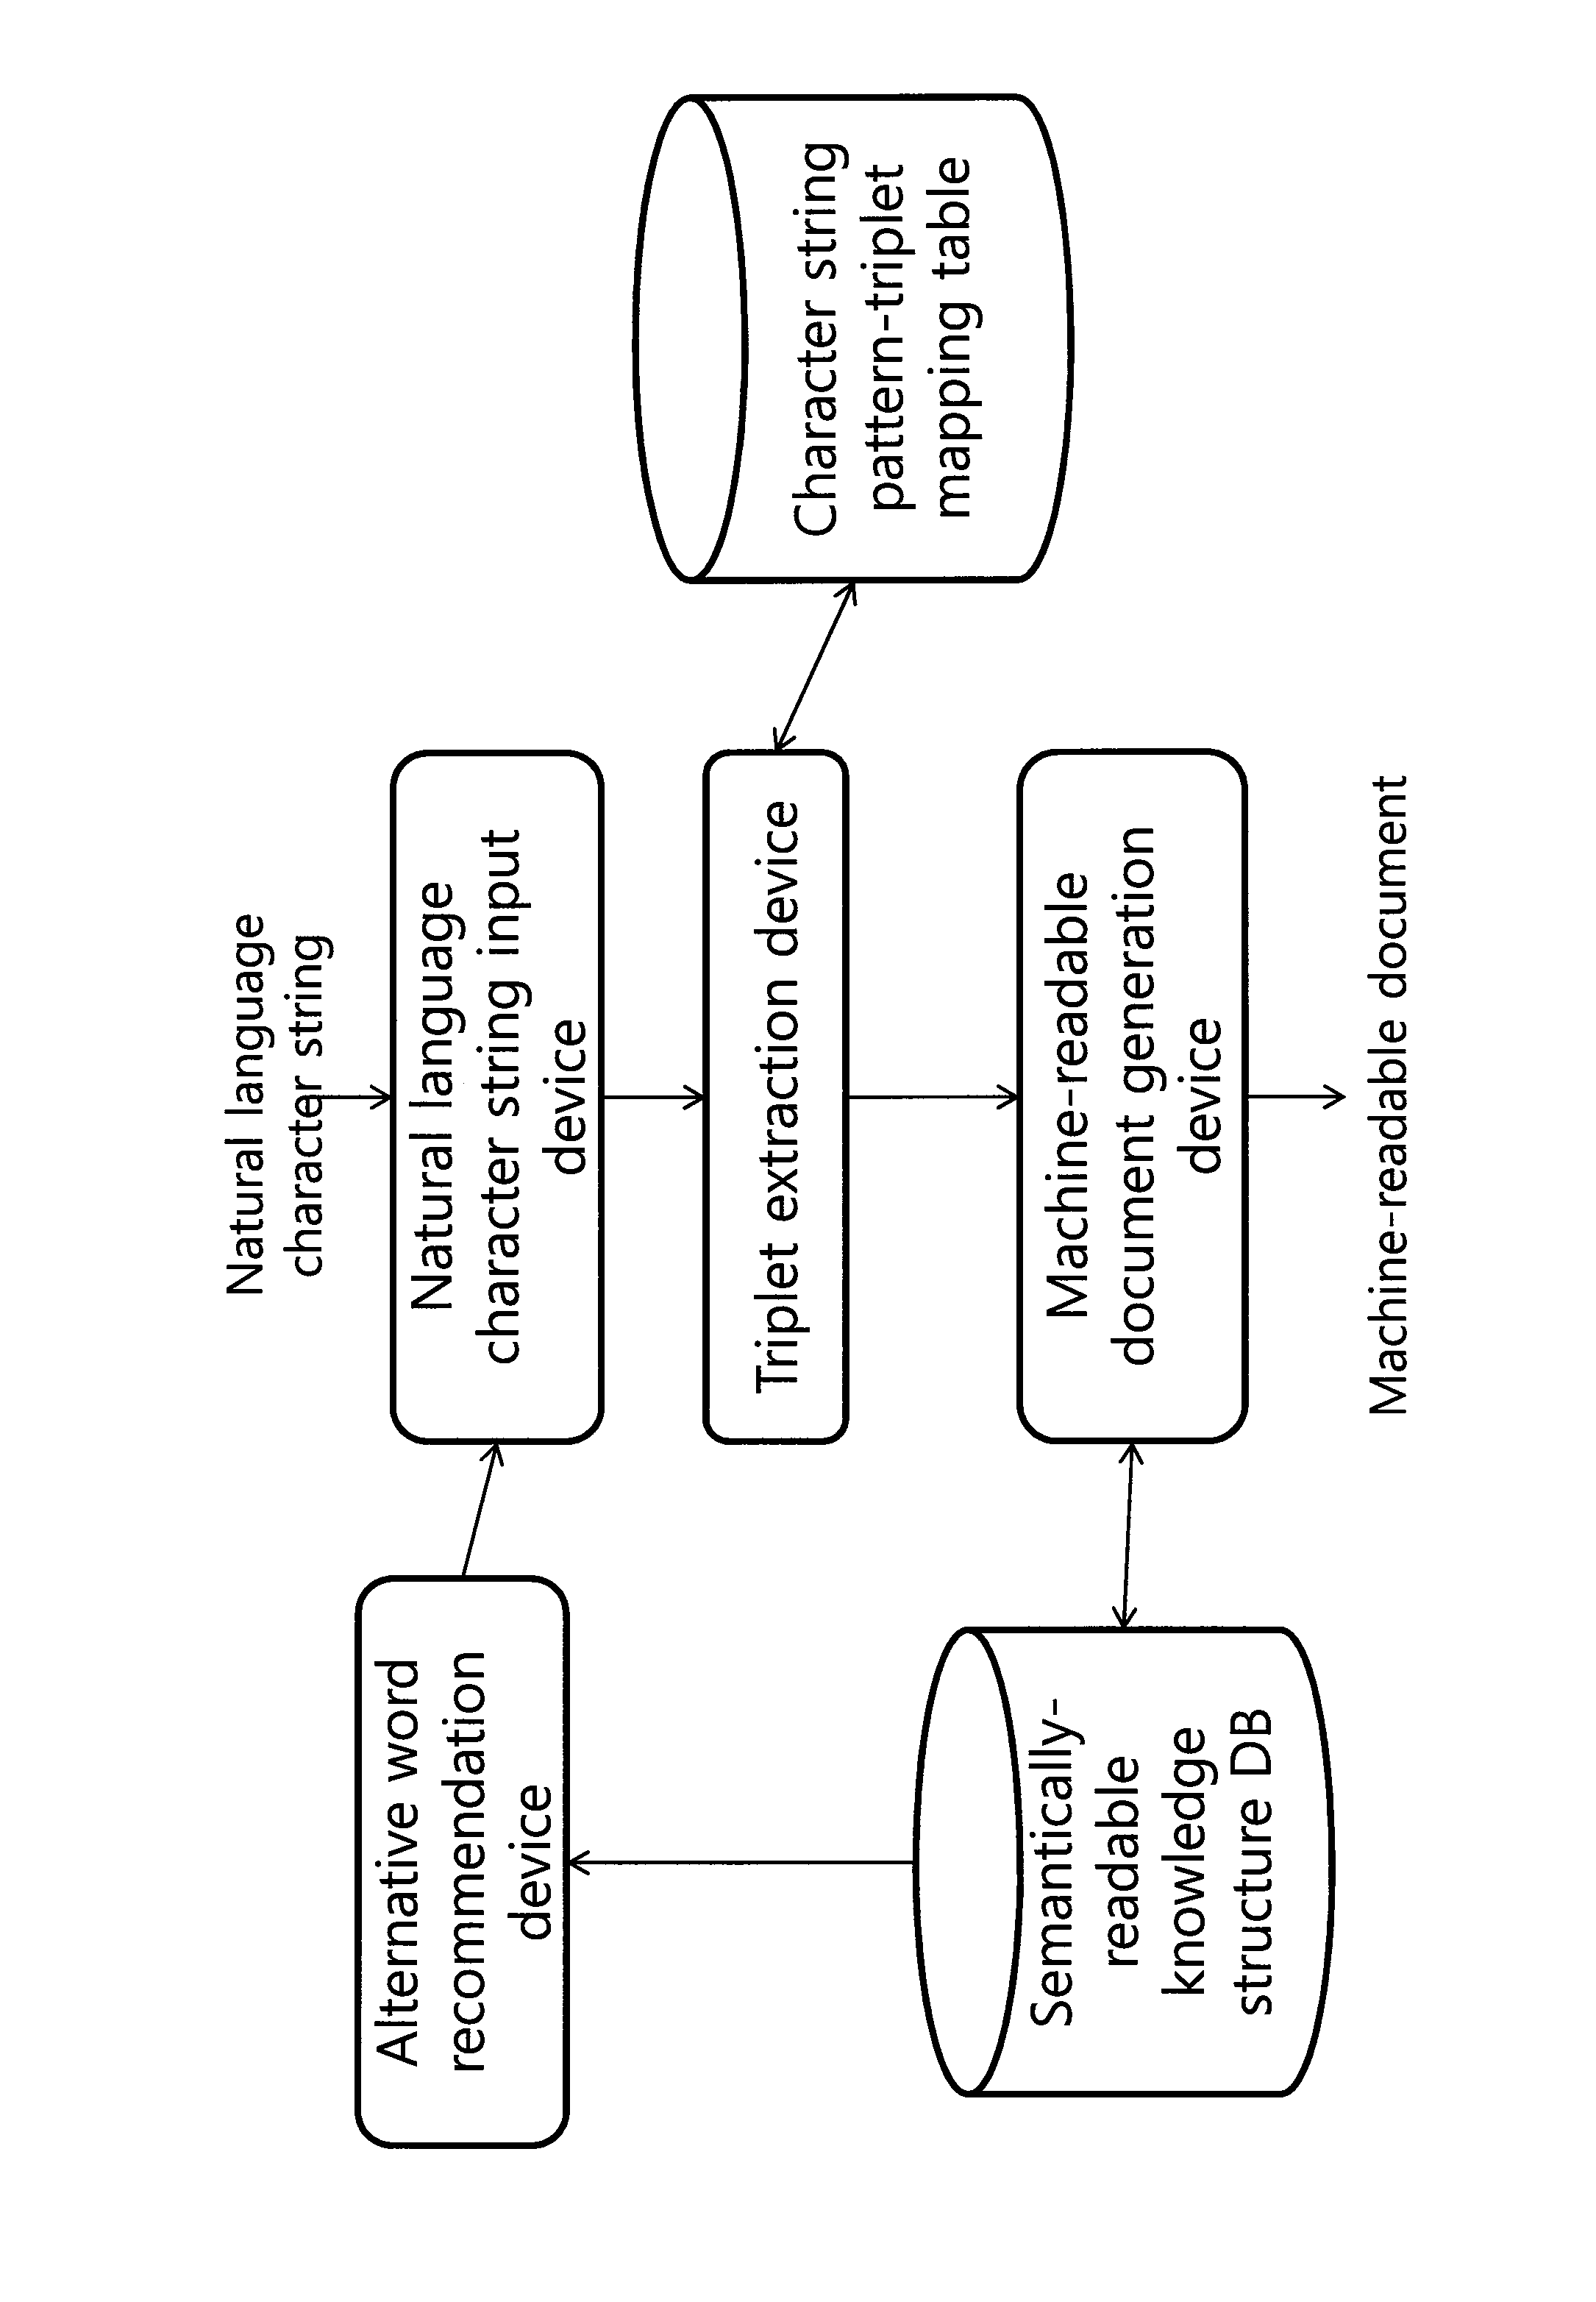 Real-time semantic annotation system and the method of creating ontology documents on the fly from natural language string entered by user